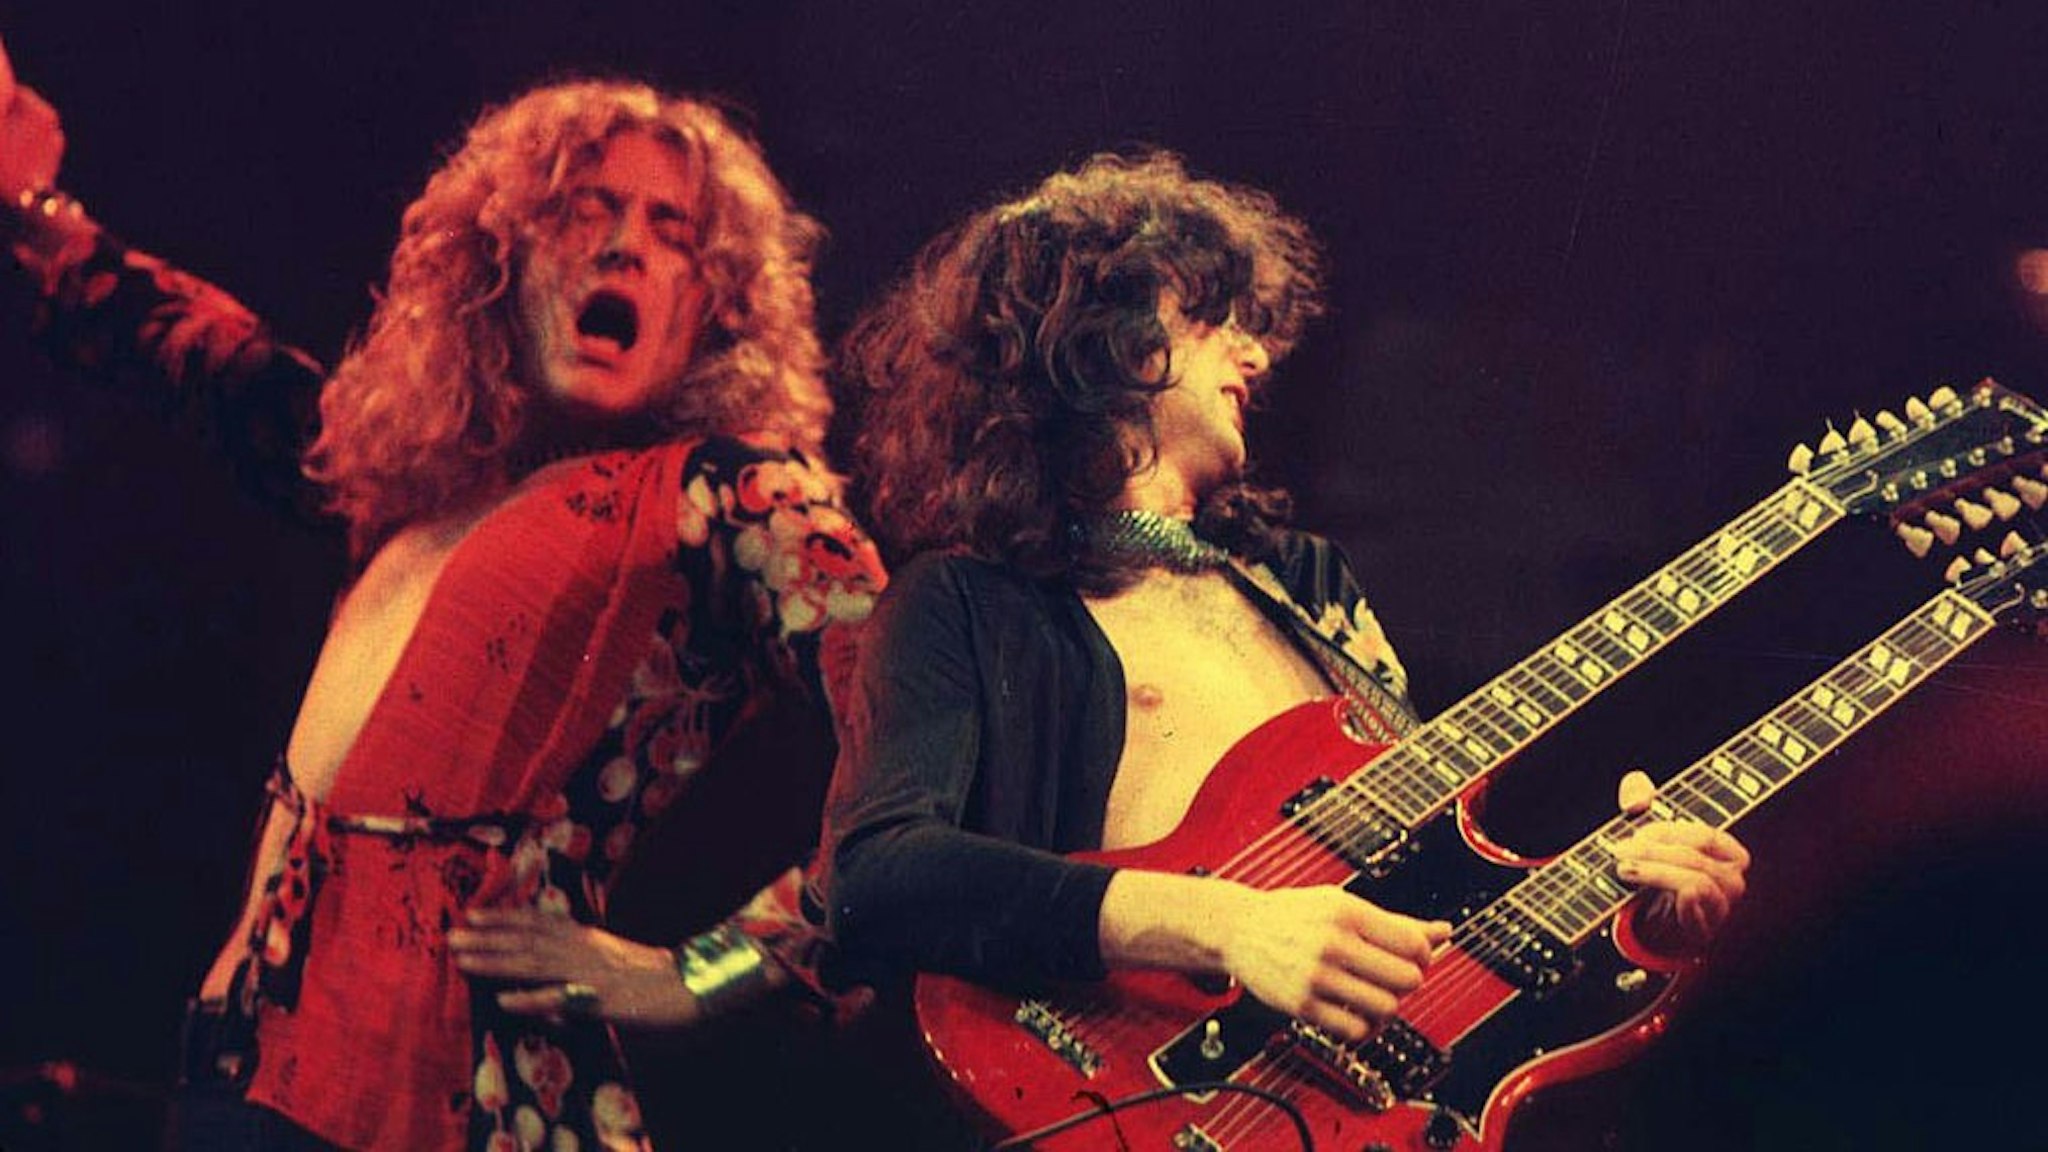 Robert Plant and Jimmy Page of Led Zeppelin at the Chicago Stadium in Chicago, Illinois (Photo by